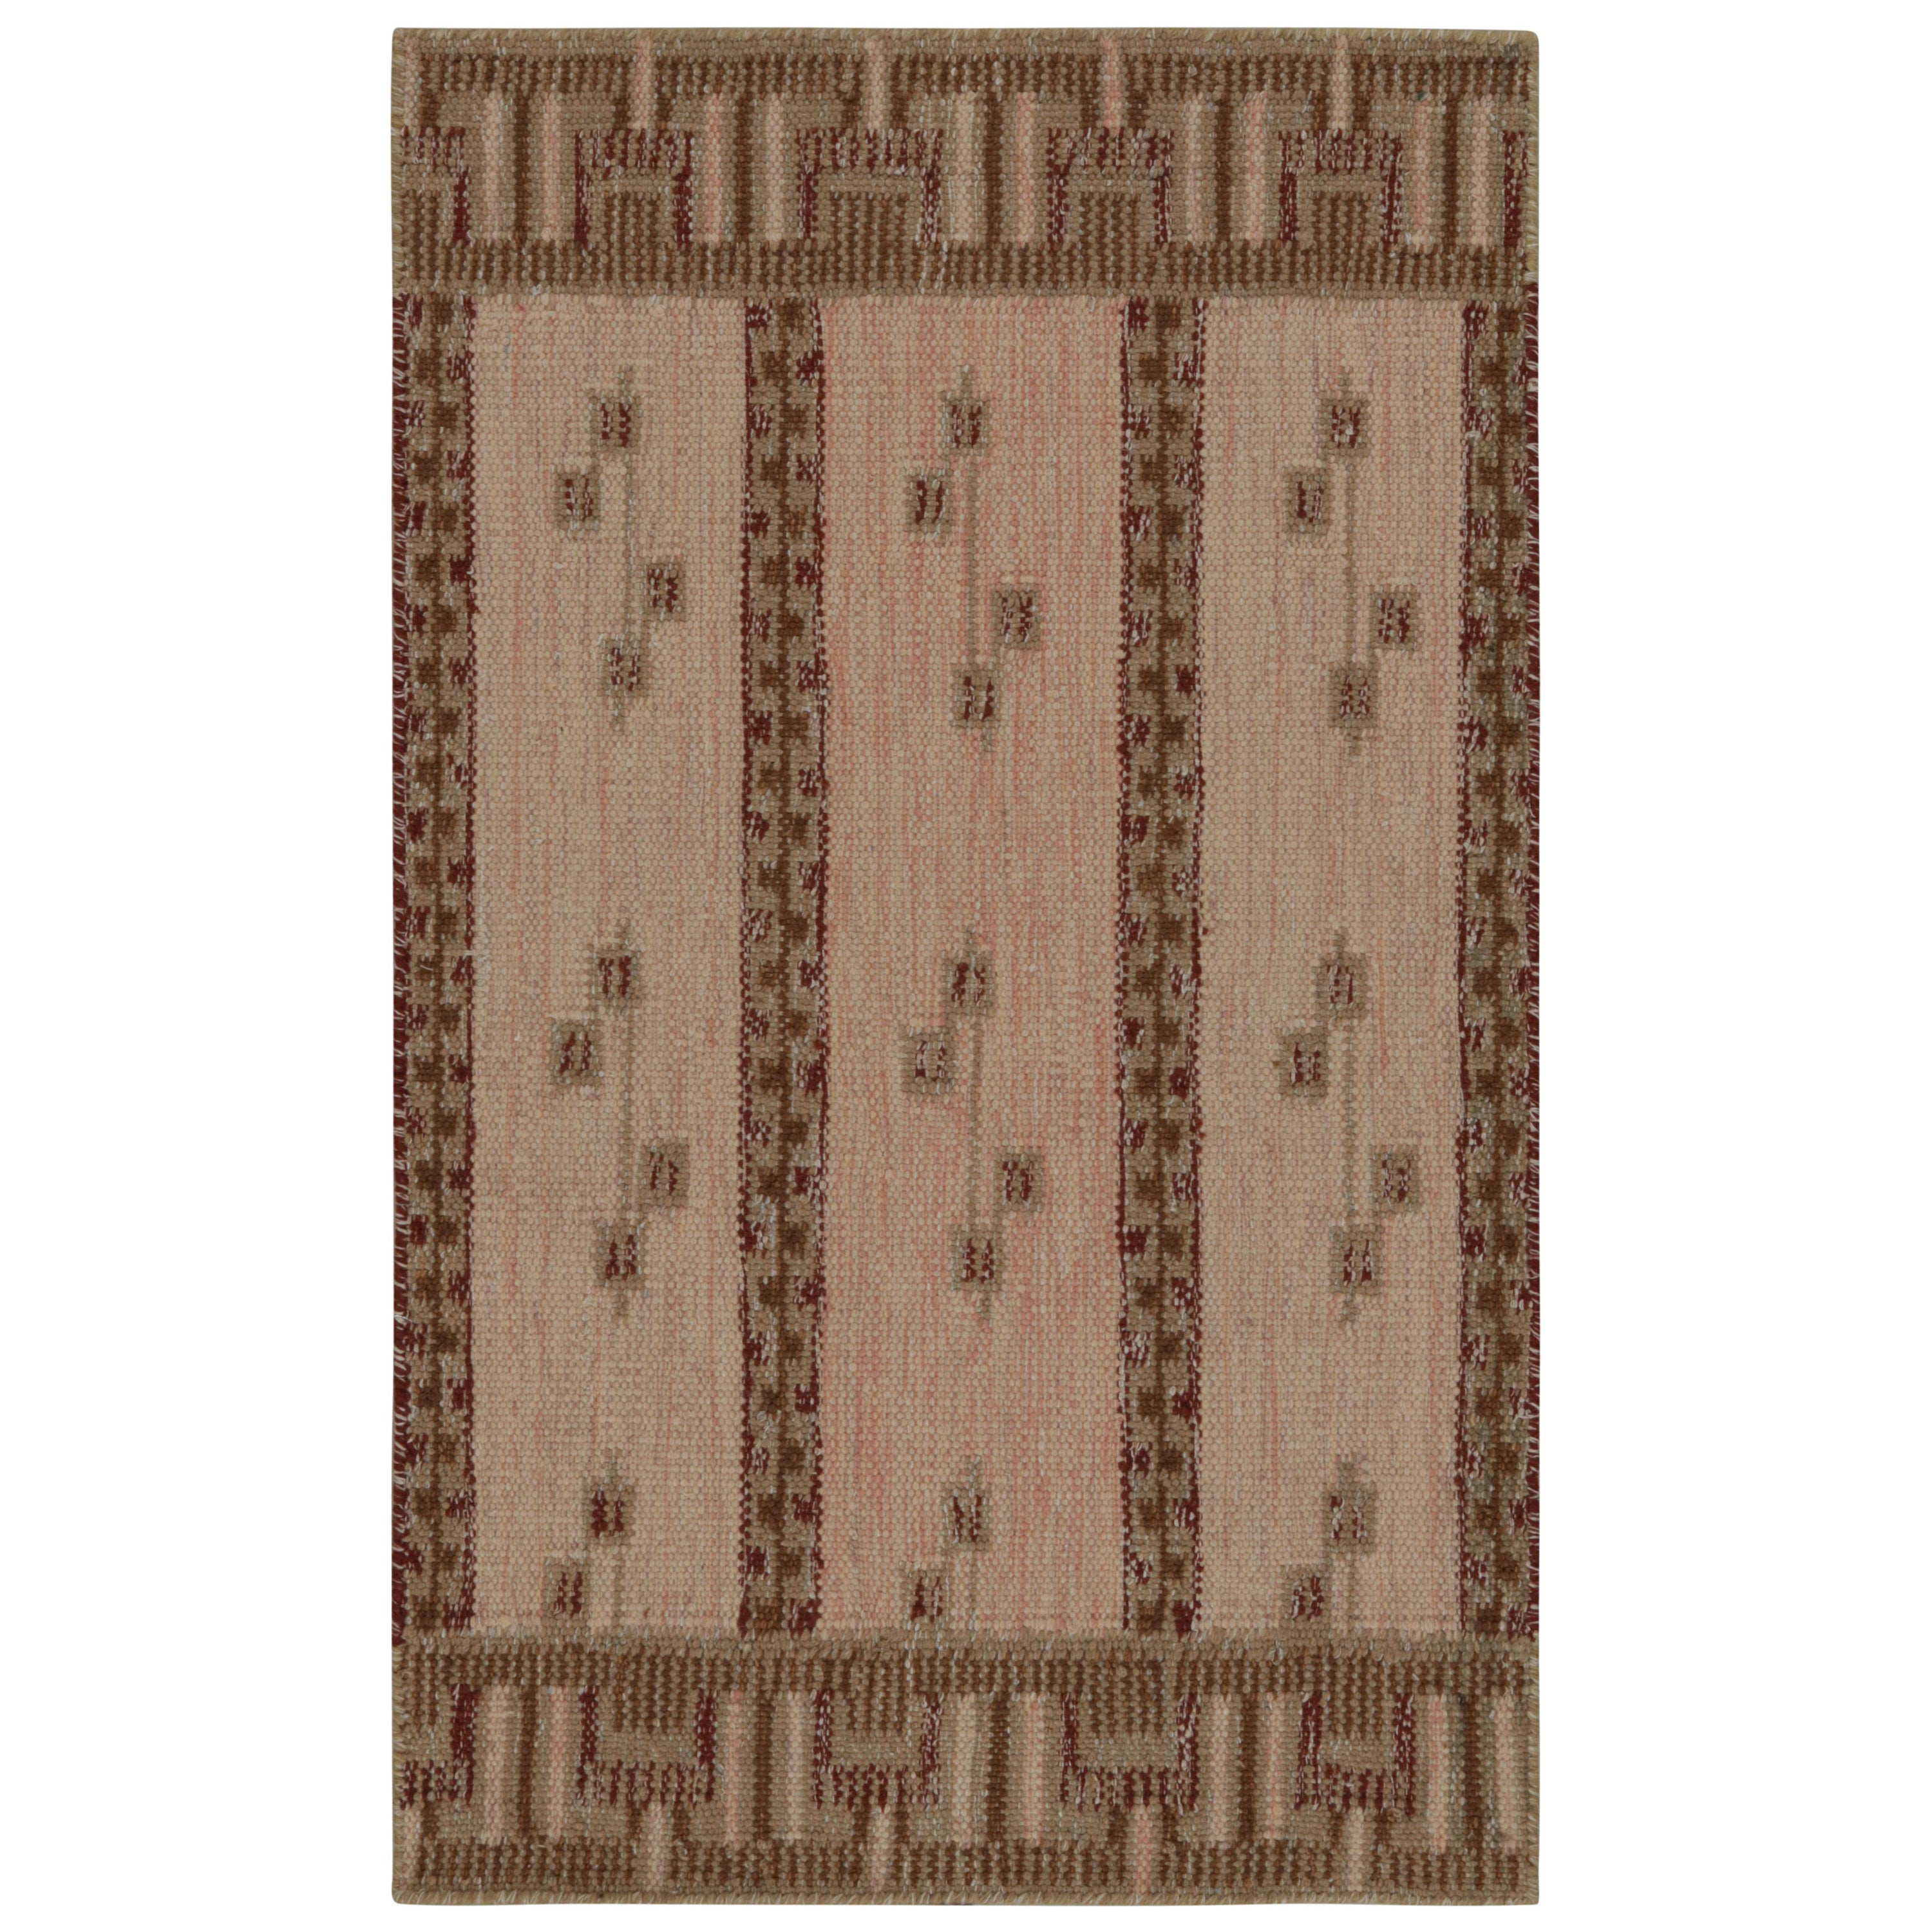 Rug & Kilim’s Pink Scandinavian Style Kilim Scatter Rug with Geometric Patterns